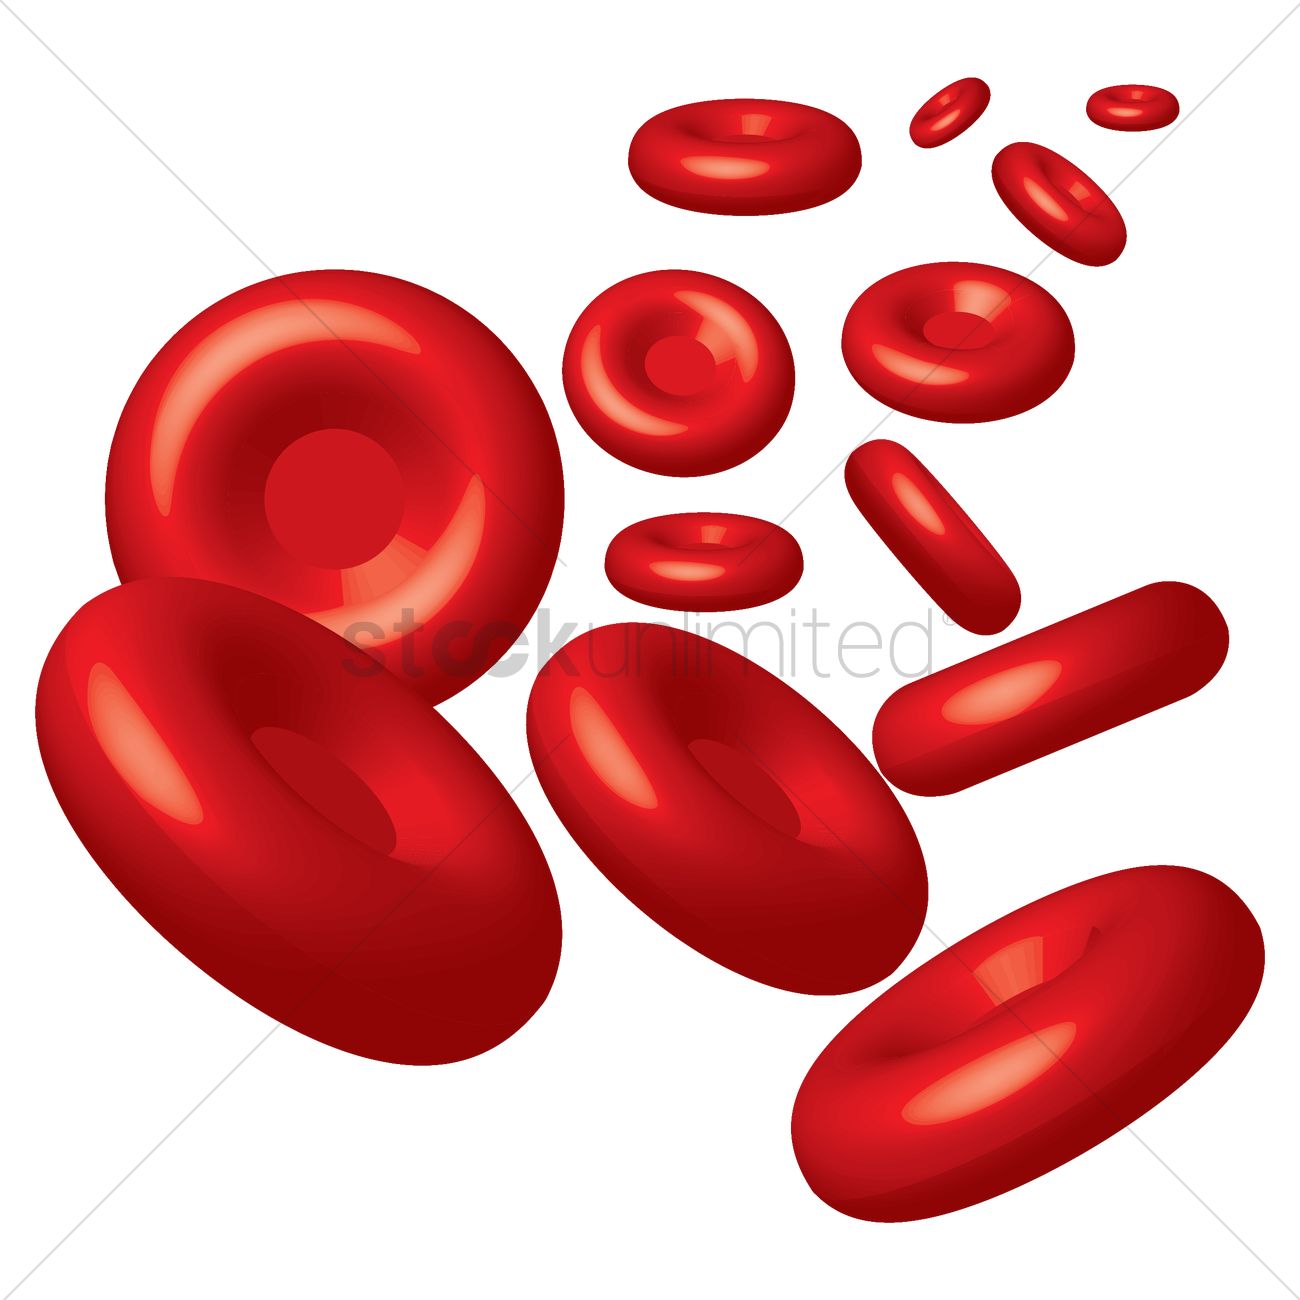 Red Blood Cell PNG - 141285